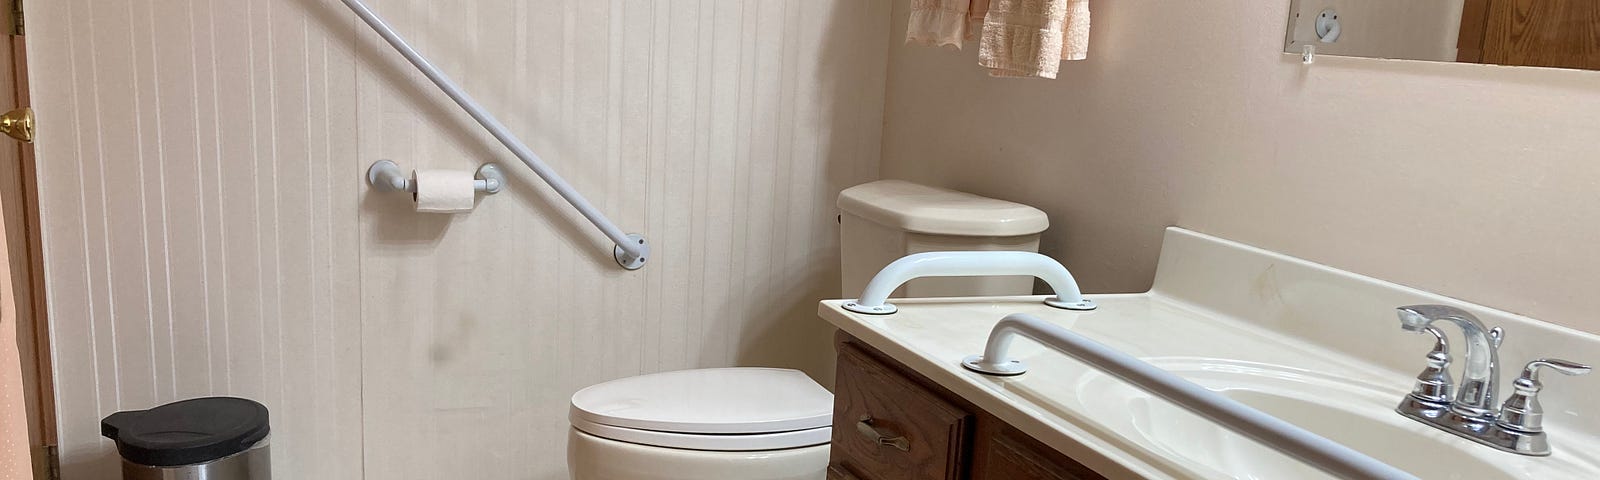 Bathroom with a tall toilet and grab bars on the wall and on the counter.